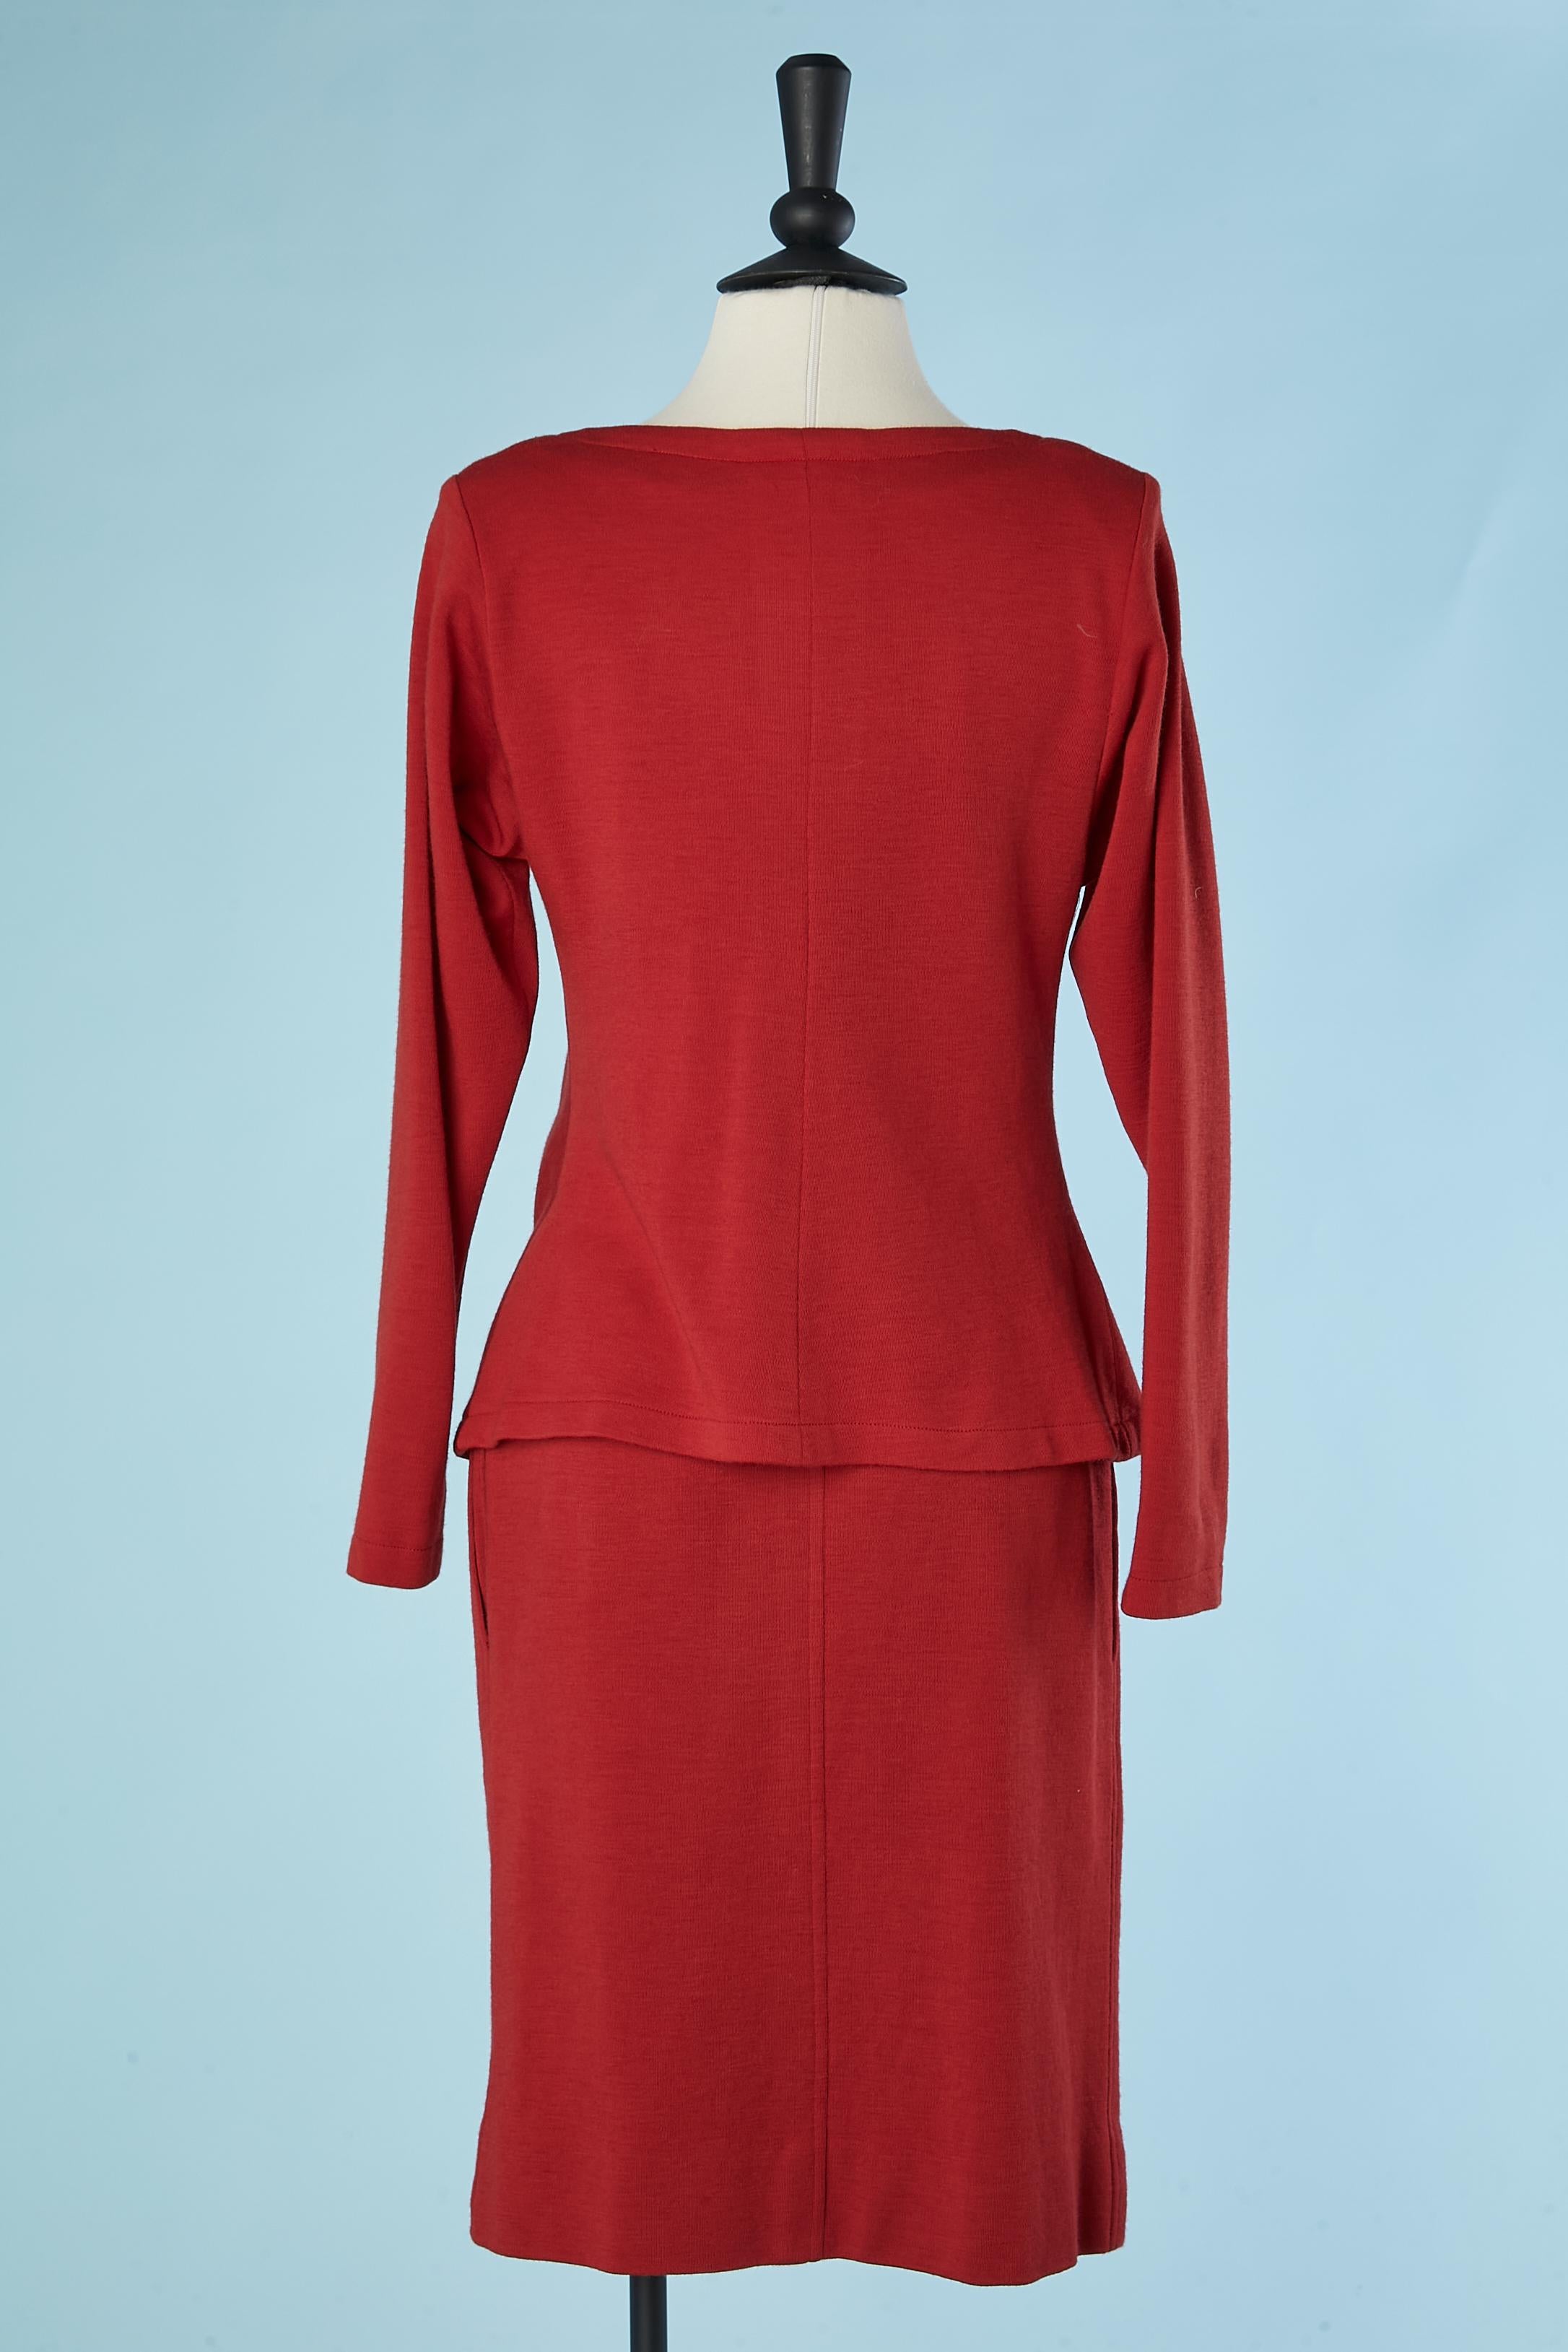 Wrap  and drape top in red wool jersey and skirt Saint Laurent Rive Gauche  In Excellent Condition For Sale In Saint-Ouen-Sur-Seine, FR